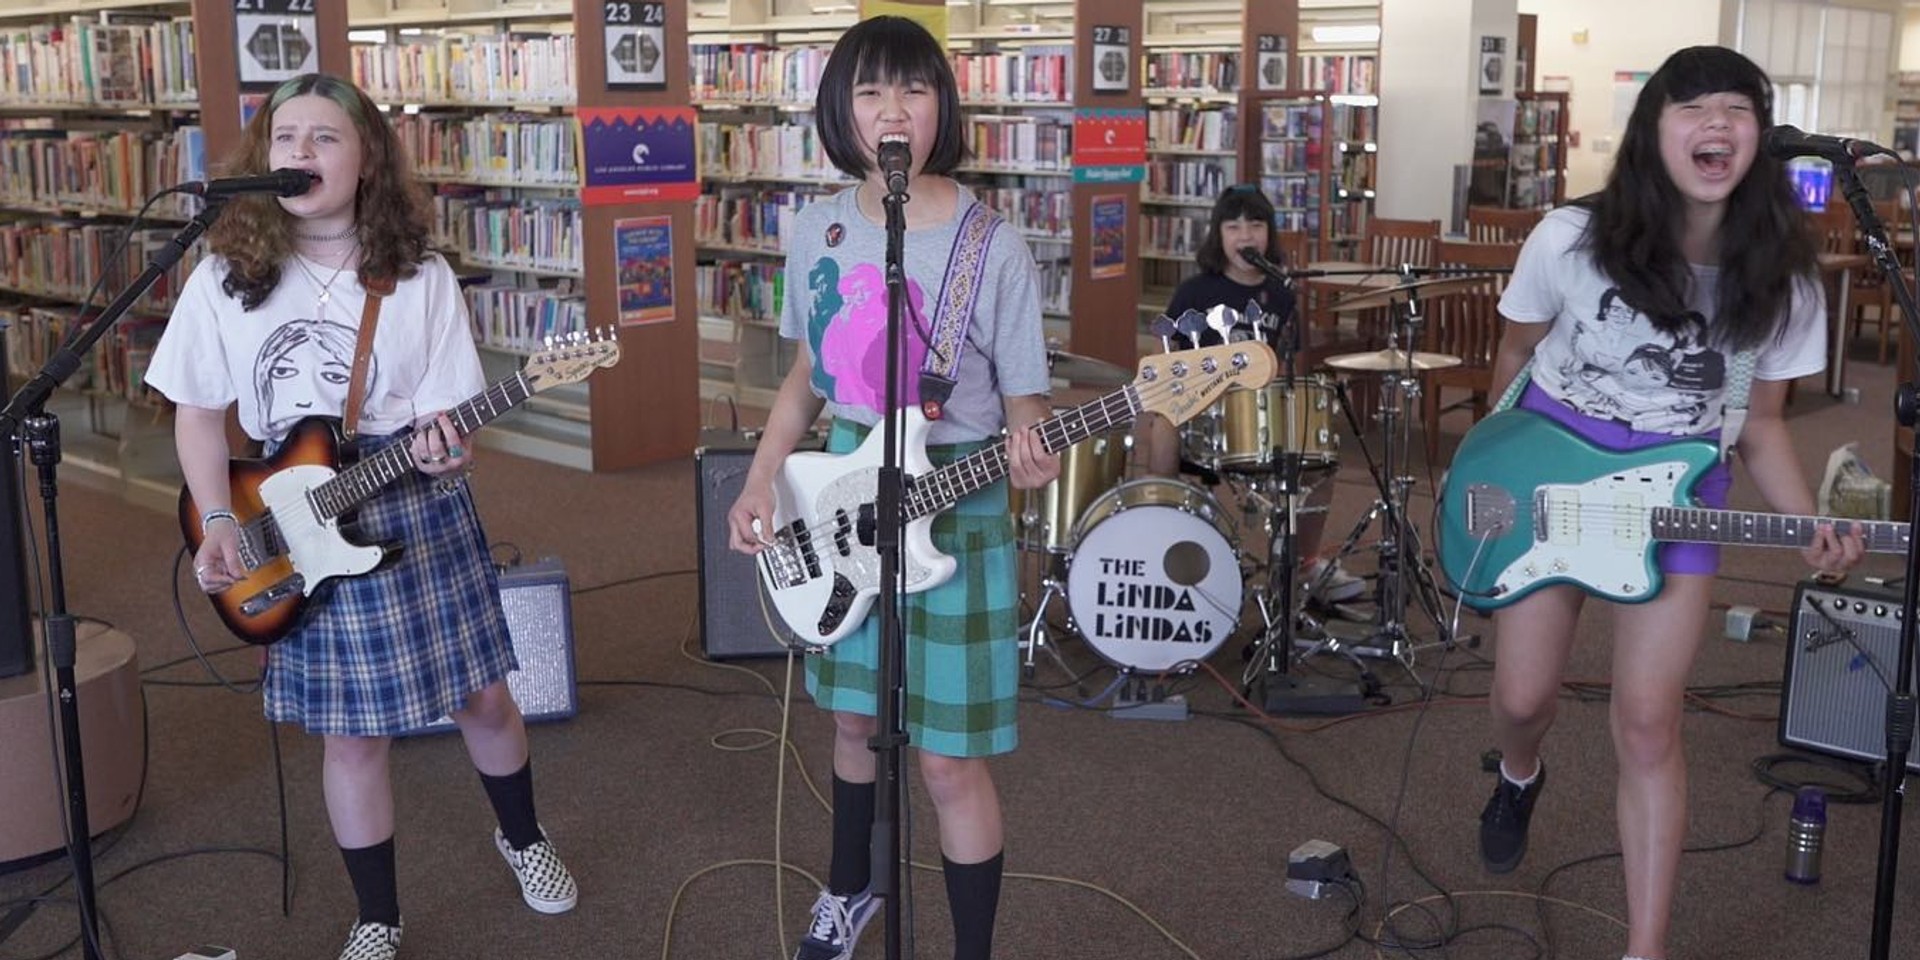 Los Angeles-based youth punk band The Linda Lindas turns encounter with racism into viral song, signs with Epitaph Records  